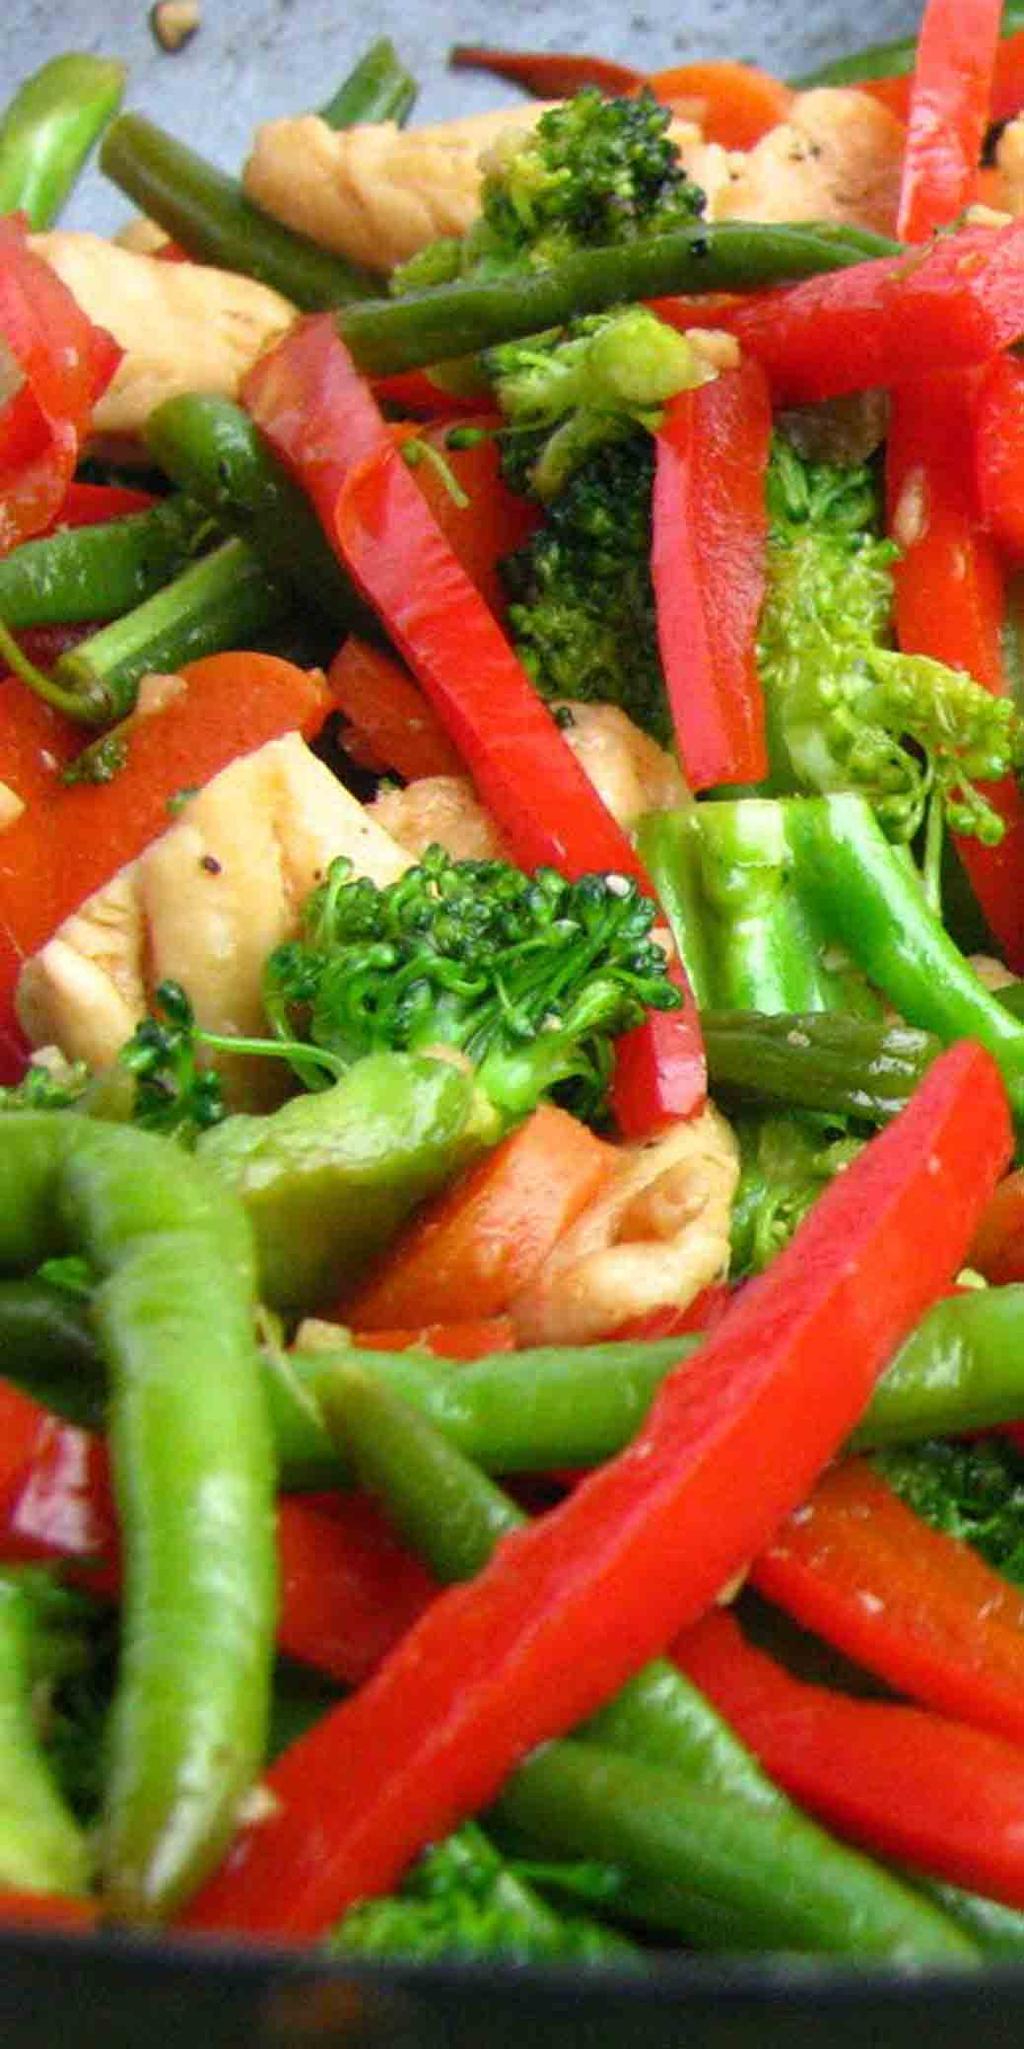 CHICKEN STIR-FRY 150g chicken breast, sliced 1 tablespoon oyster sauce 1 tablespoon soy sauce 1 teaspoon rice bran oil 2 cups of stir fry vegetables, thinly sliced (try capsicum, bok choy, carrot,